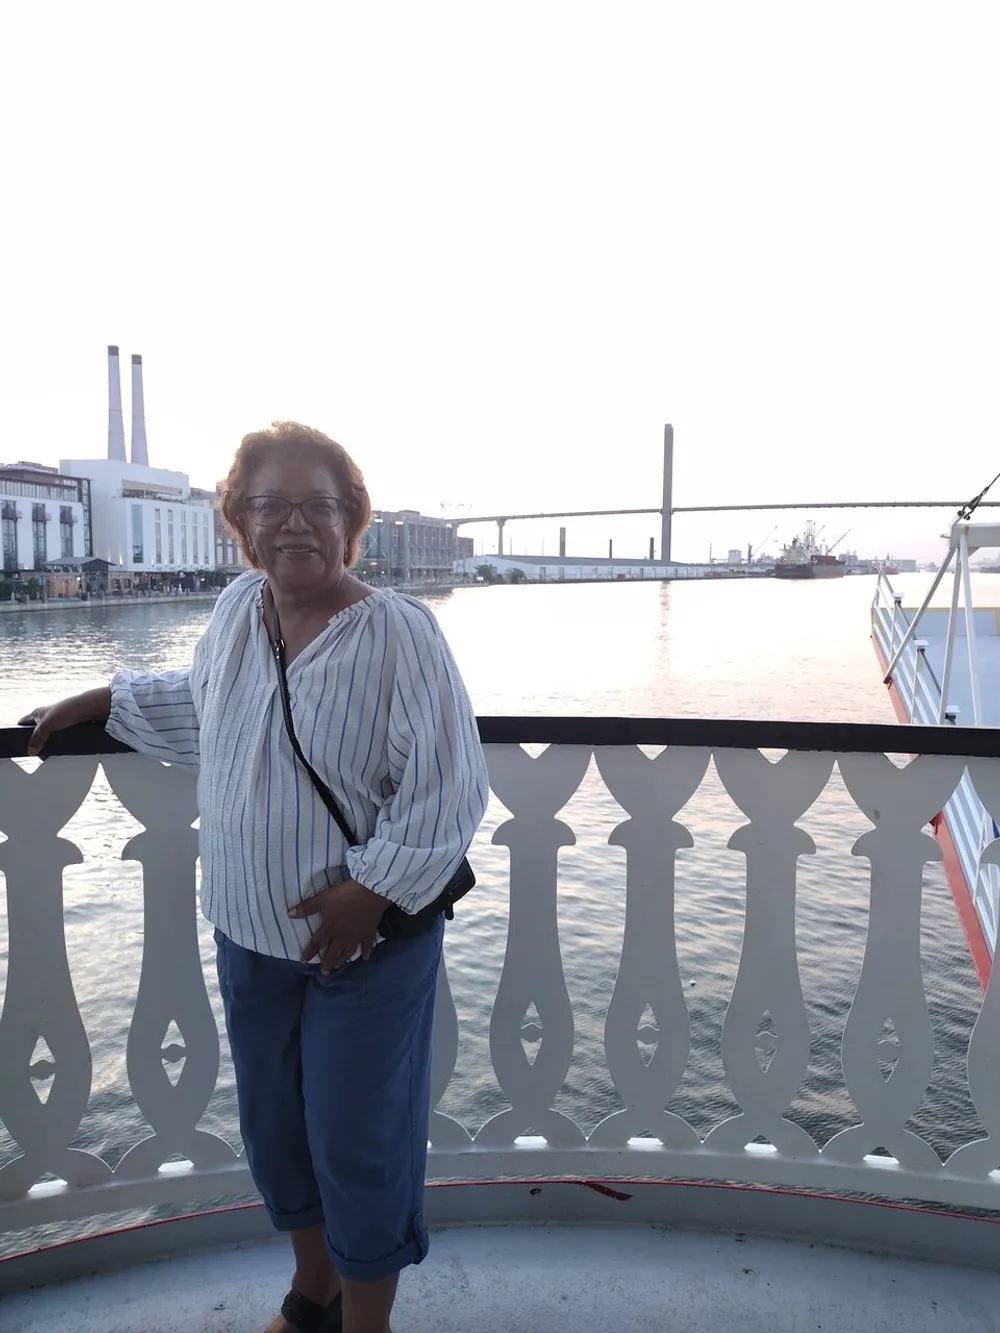 A smiling person stands by a railing on a waterfront with a bridge spanning the water in the background during what appears to be either sunrise or sunset